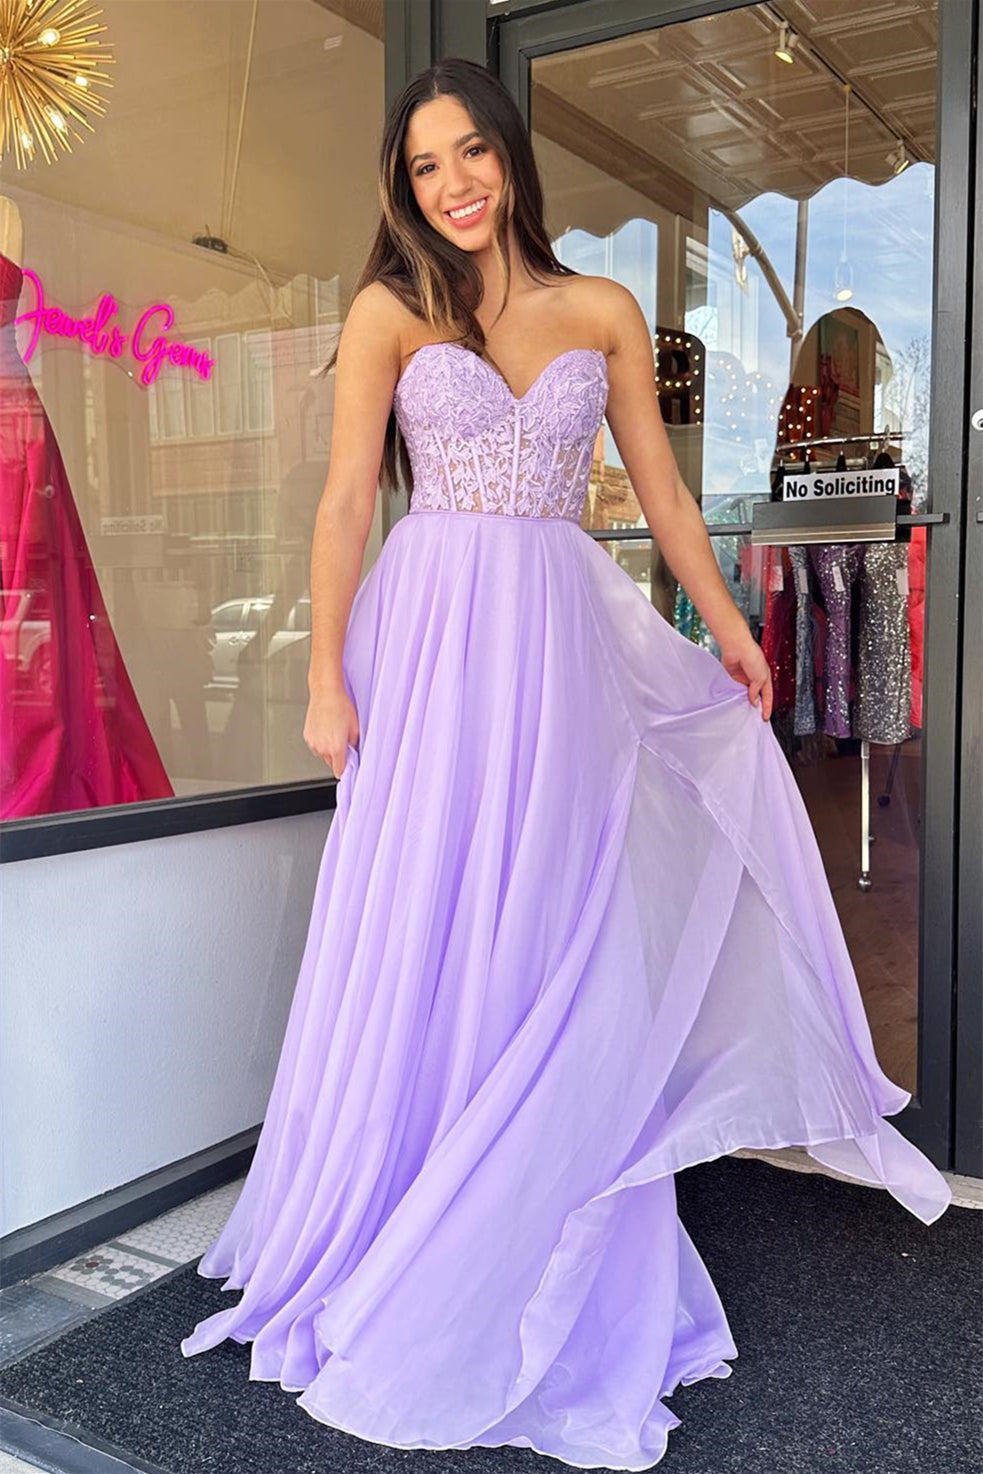 Lilac Applique Strapless A-line Long Prom Gown with Puff Sleeves